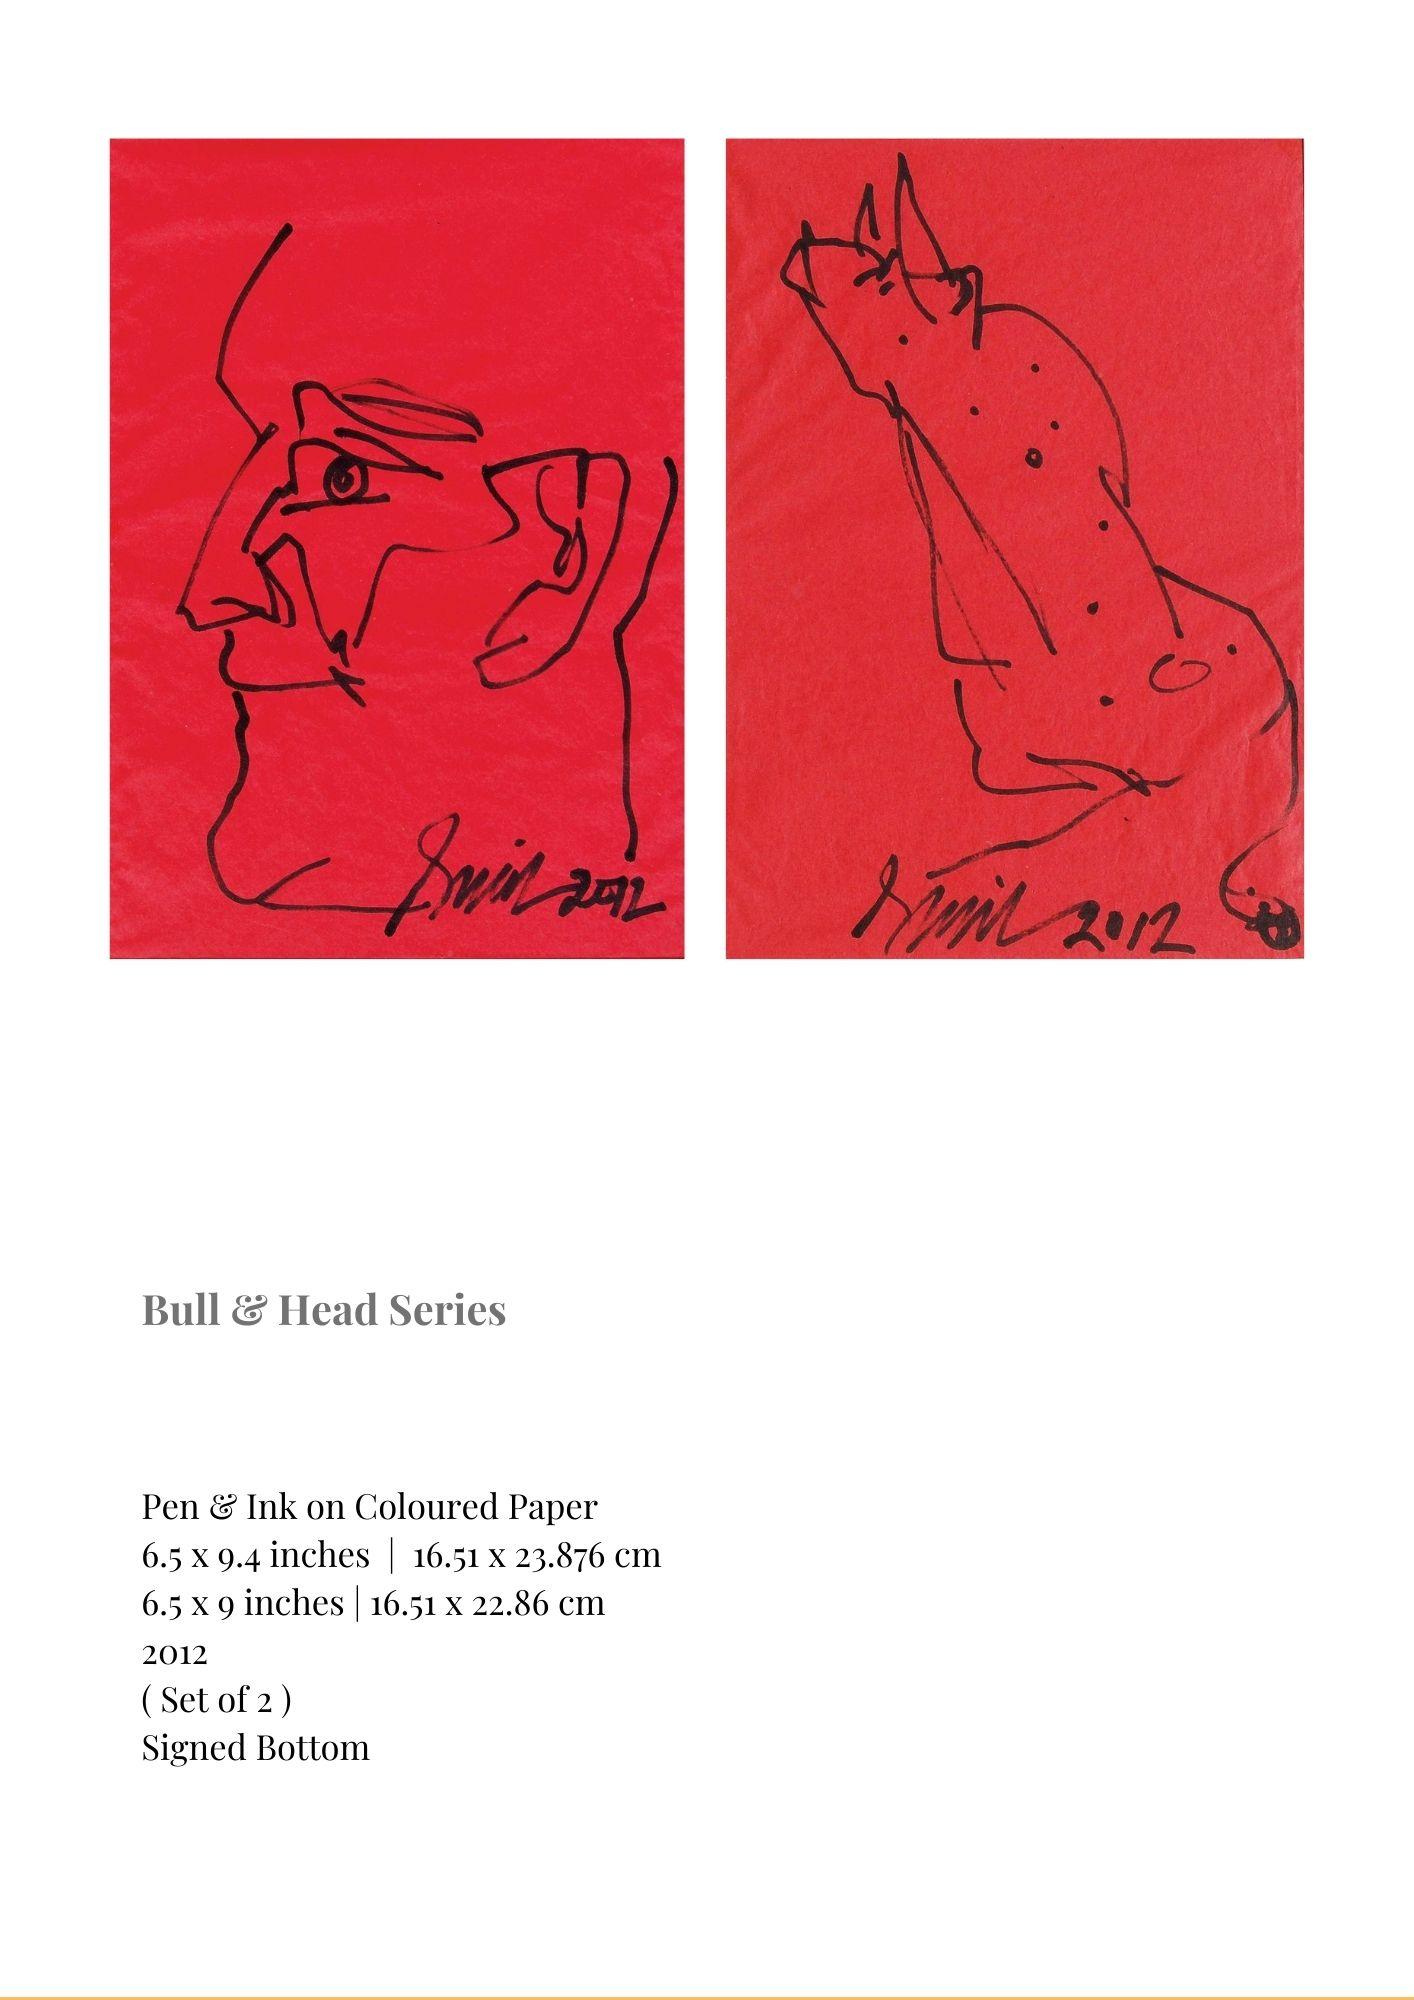 Bull & Head Series Pen & Ink on Paper Set of 2 by Modern Indian Artist-In Stock